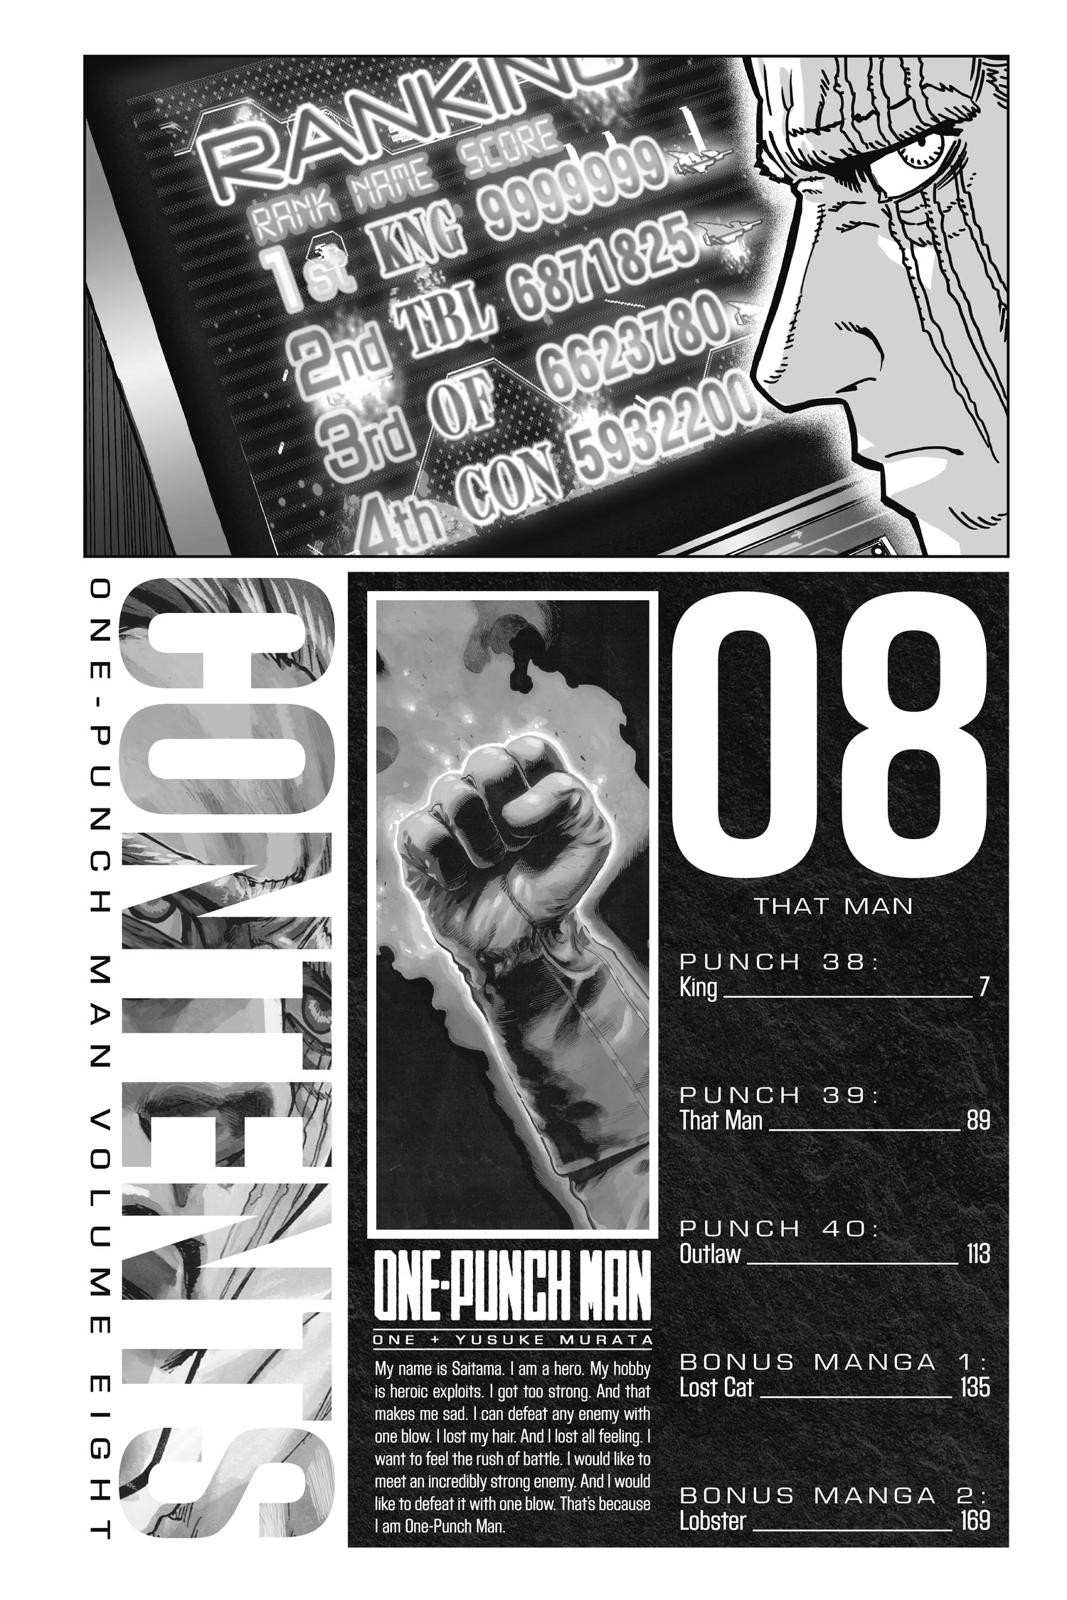 One-Punch Man, Punch 38 image 06